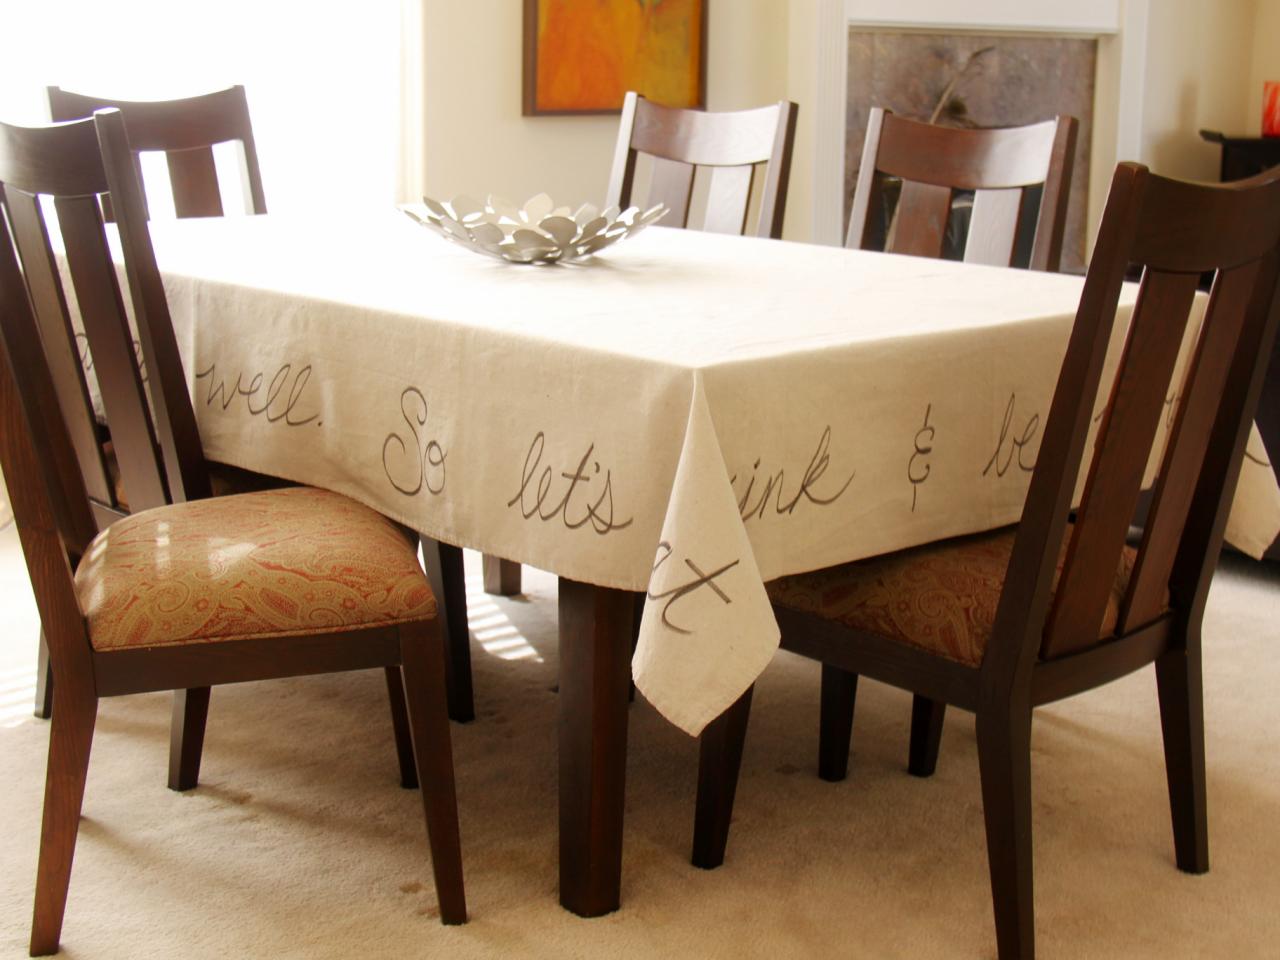 How To Make A Handwritten Tablecloth, Dining Room Tablecloths